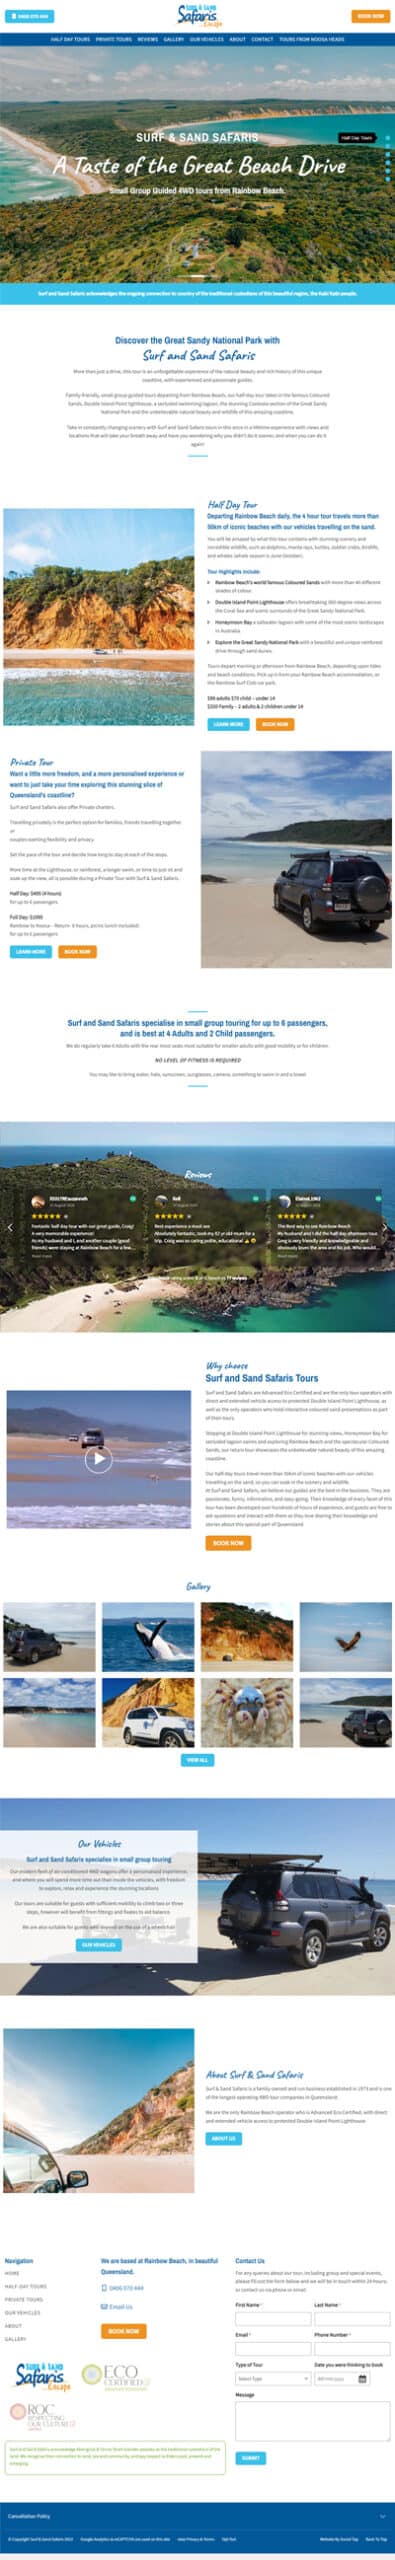 Our Work Hospitality Tourism Website Design Surf And Sand Safaris